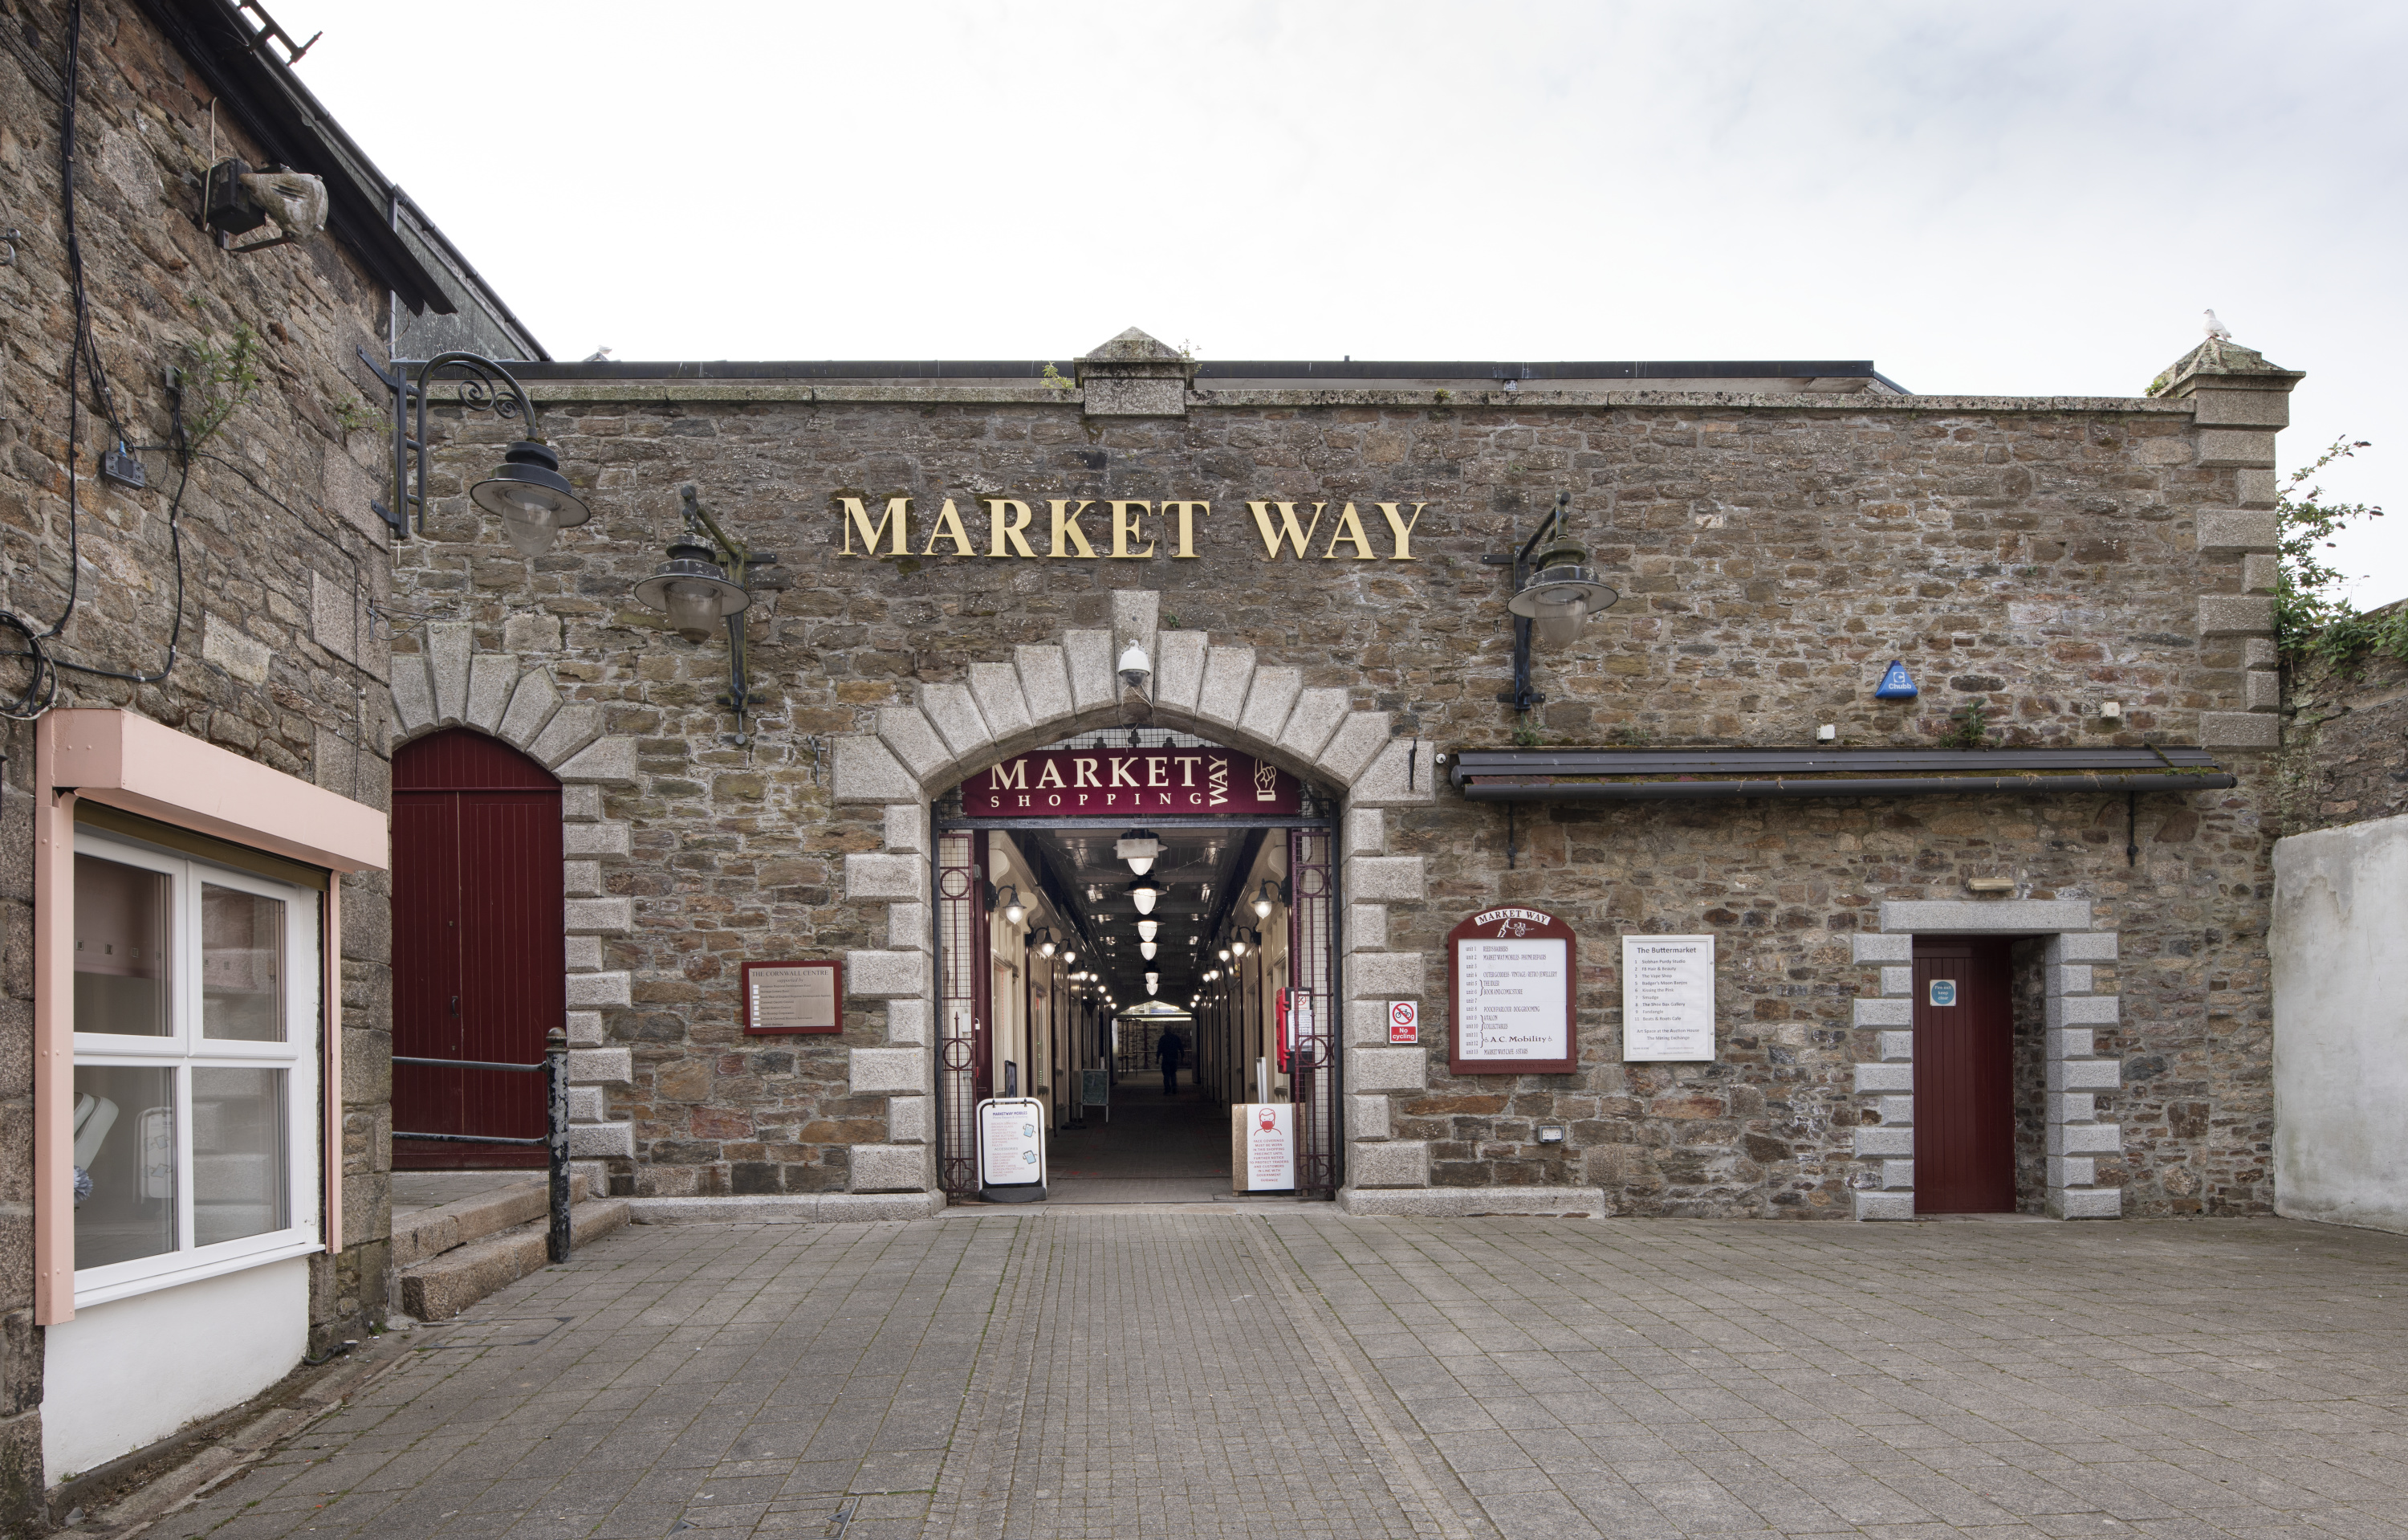 The entrance to a historic covered market building